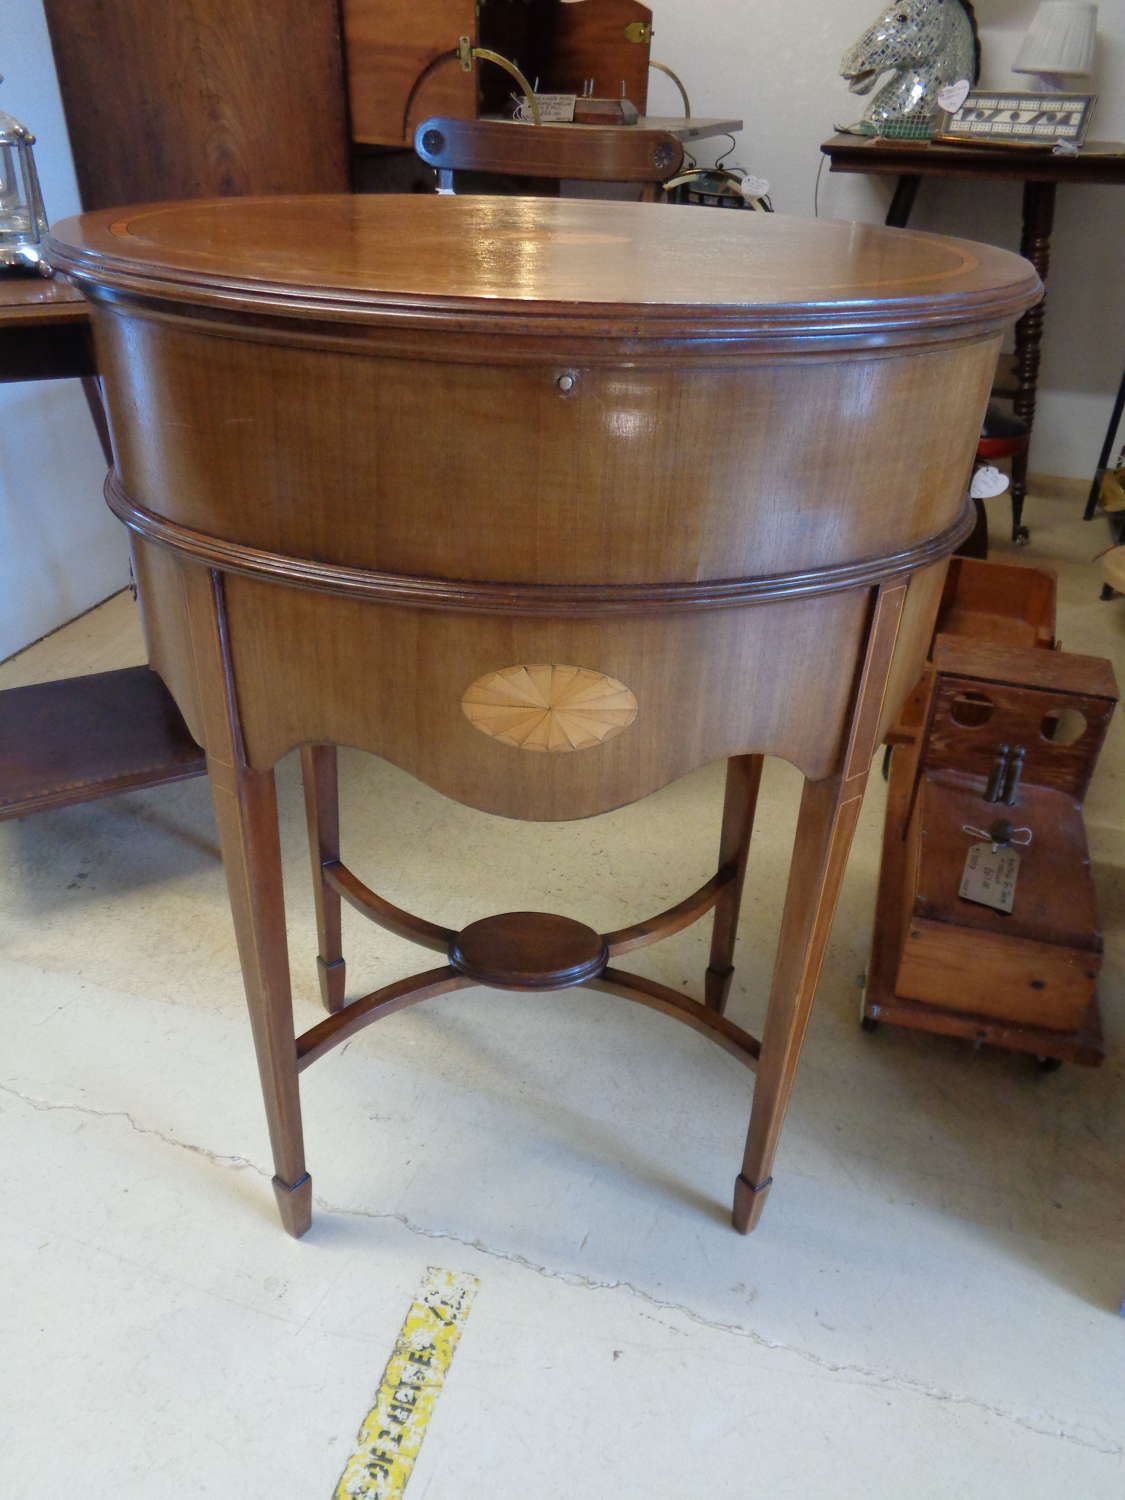 Edwardian Oval Table with Lifting Lid & Interior Storage